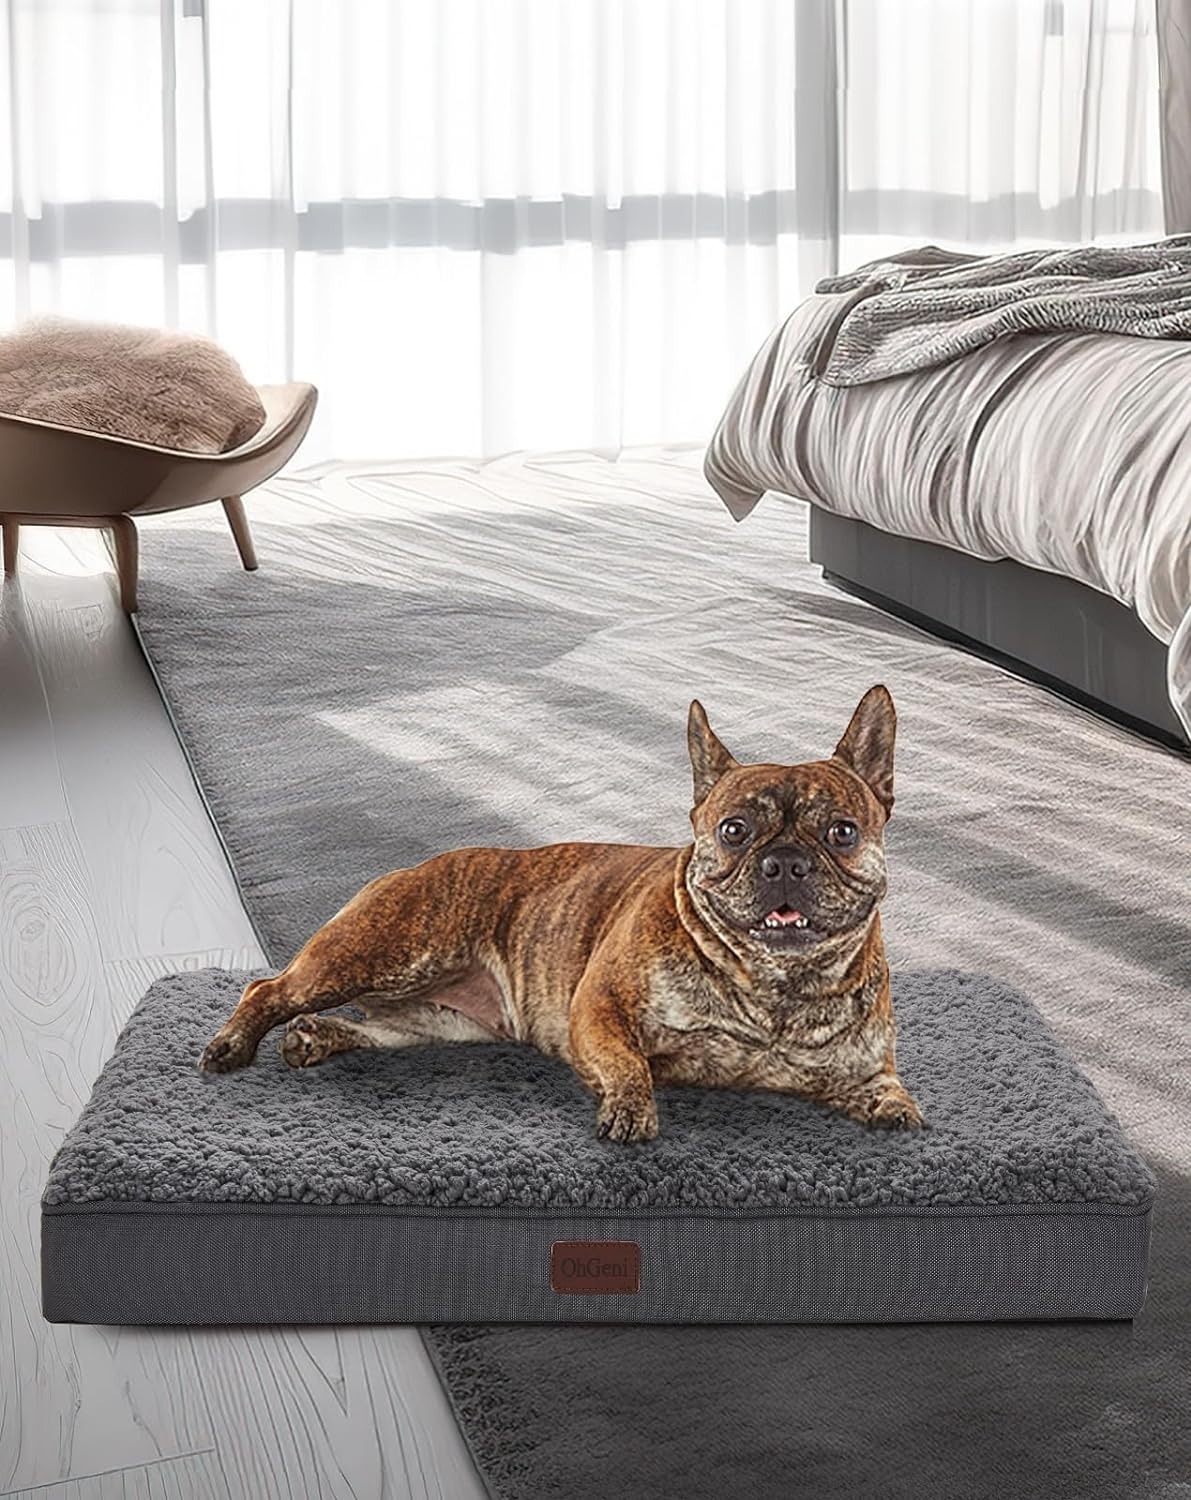 OhGeni Waterproof Medium Orthopedic Dog Bed w/ Machine Washable Pet Bed Cover $15 + Free Shipping w/ Prime or orders $35+